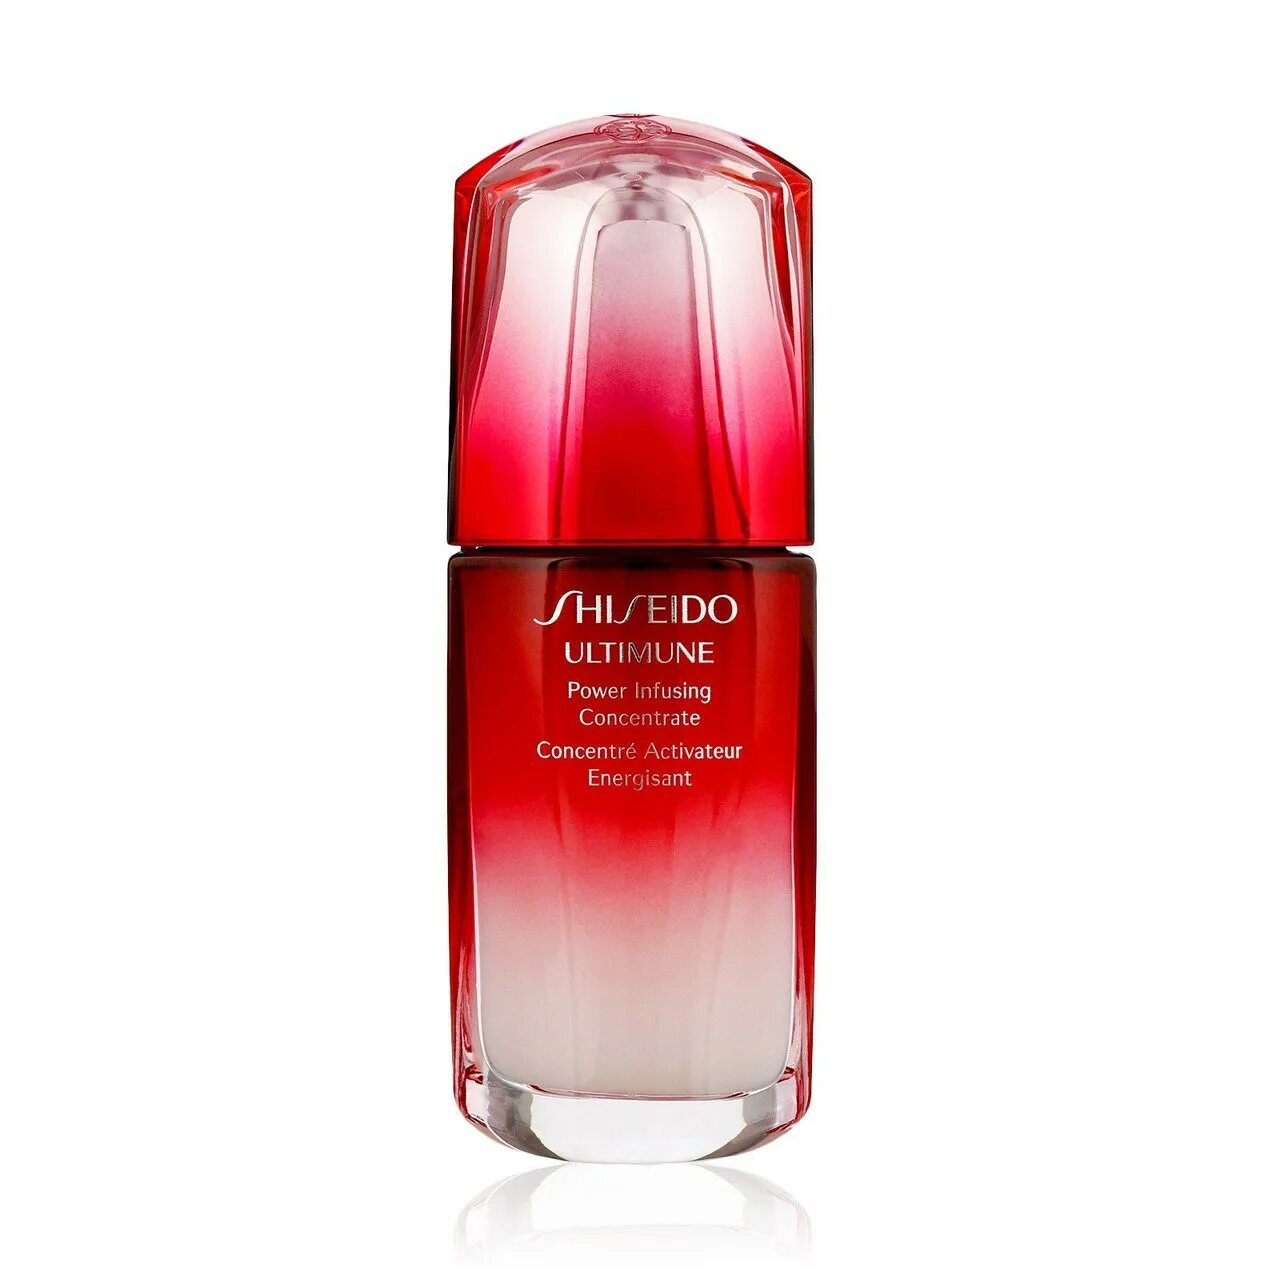 Shiseido концентрат. Shiseido Ultimune Power infusing Concentrate. Ultimune концентрат шисейдо. Ultimune концентрат шисейдо Power infusing. Концентрат Shiseido Ultimune Power infusing Concentrate.